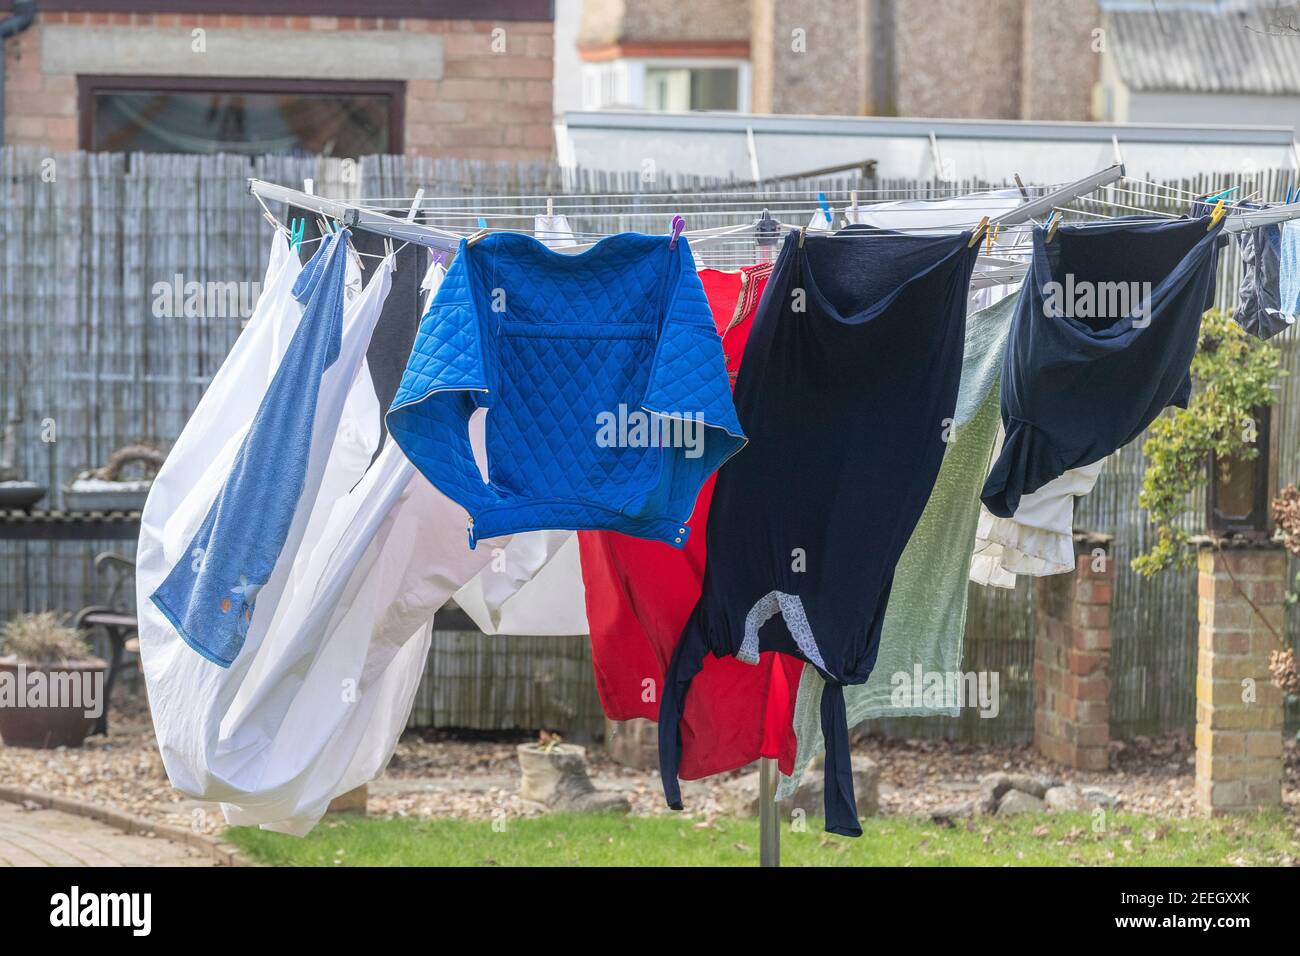 Washing hang on a rotary cloths line blowing in the wind in a backgarden, Northampton, England, UK. Stock Photo